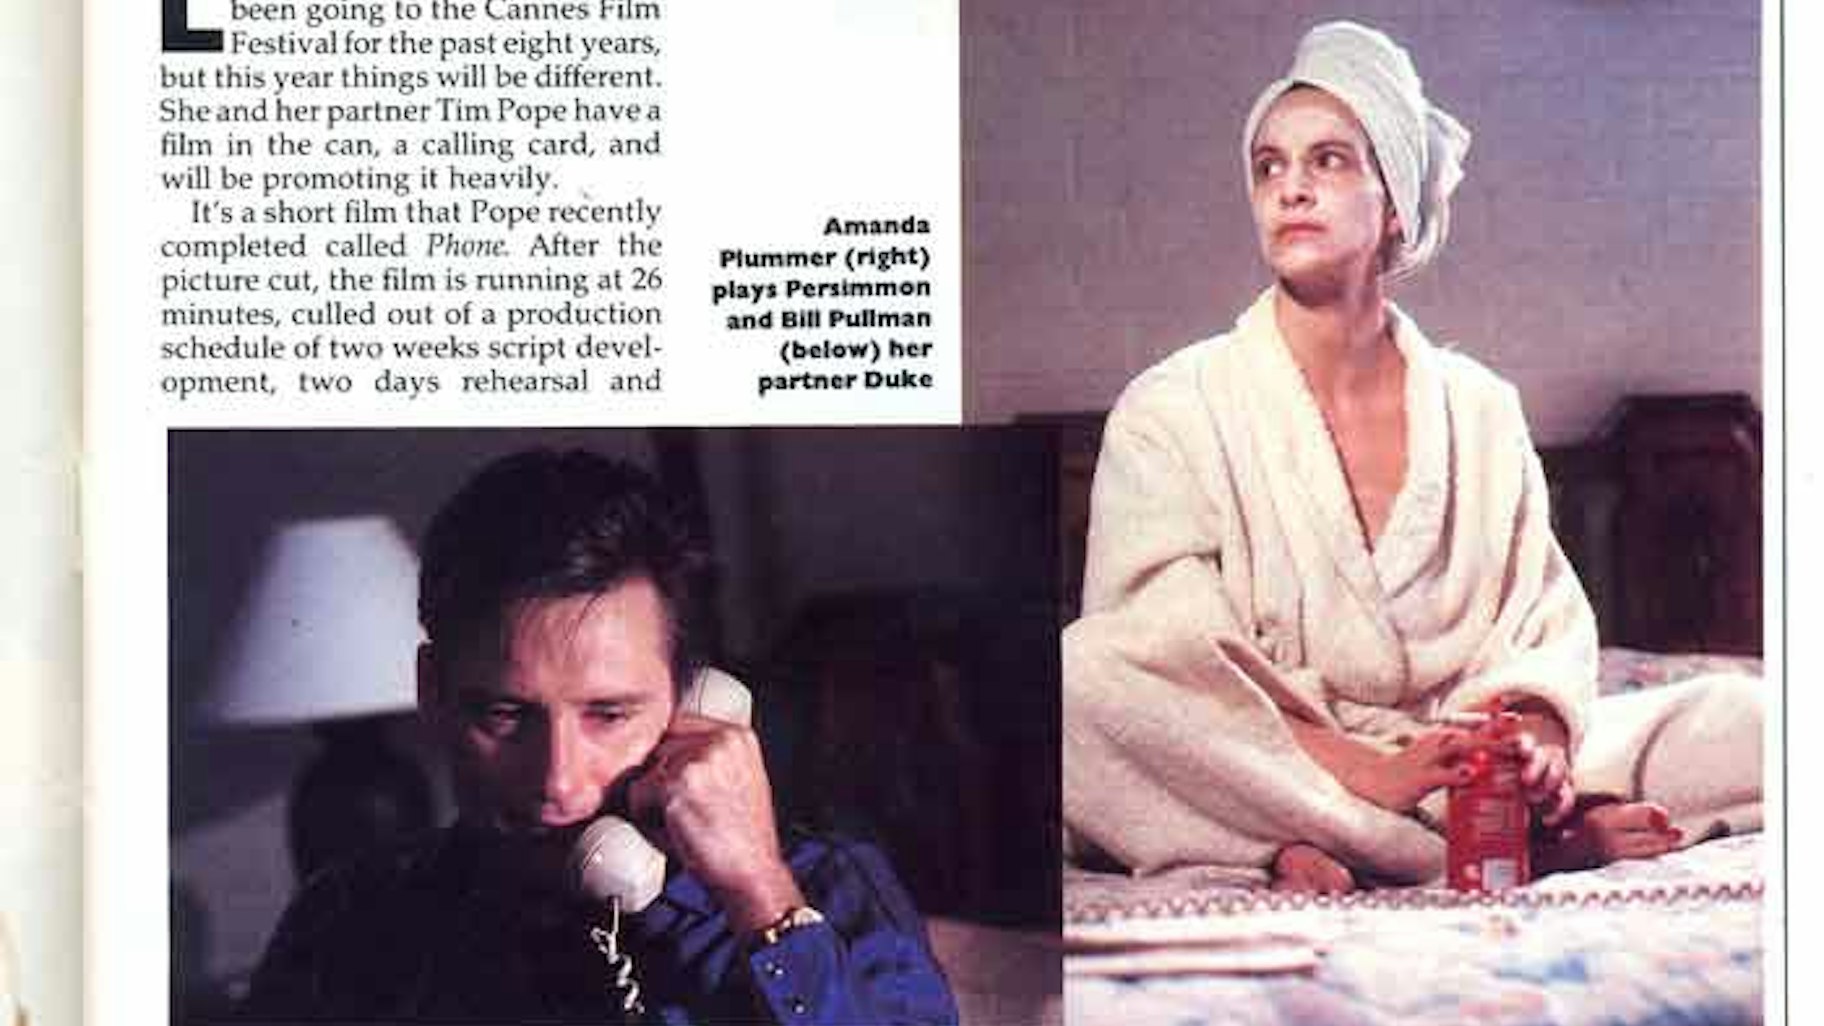 Televisual article about Tim Pope's short film, "Phone," May, 1992 -